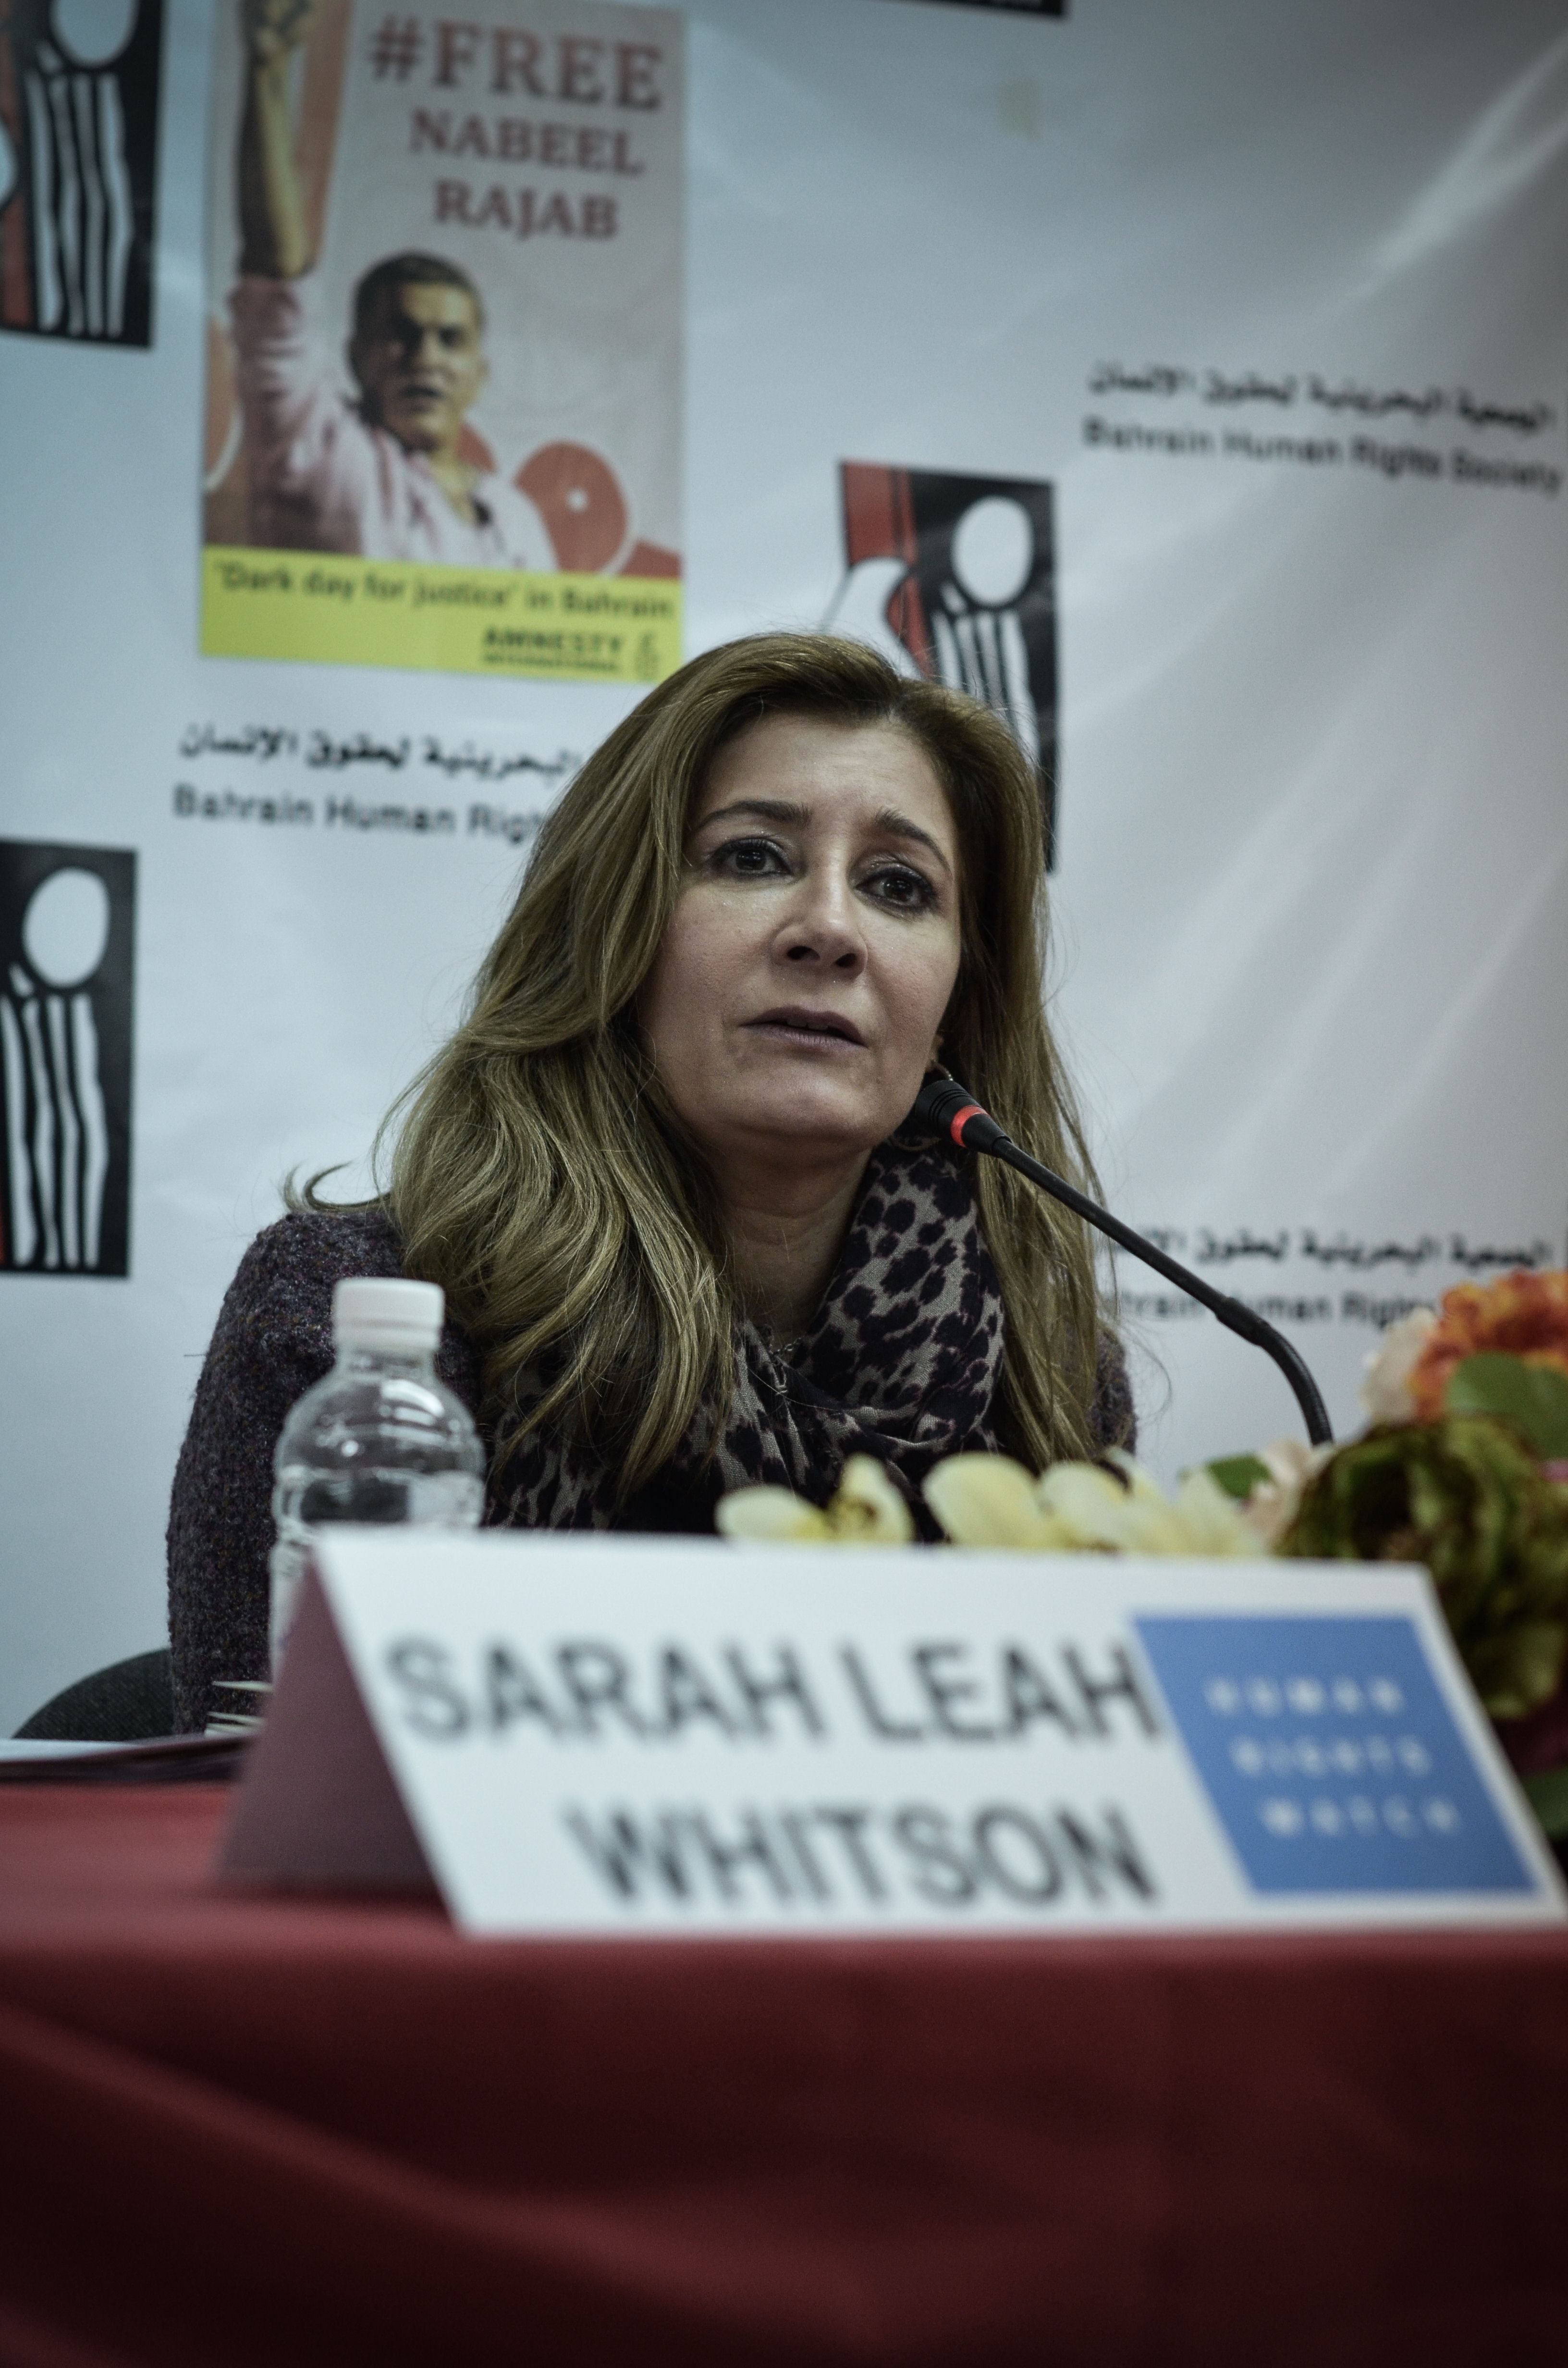 "Defence lawyers cannot possibly defend their clients adequately without seeing the documents setting out the evidence against them," said Leah Whitson. Photo: Sarah Leah Whitson US director of the Middle East and North Africa division of International organization Human Rights Watch (HRW) (AFP Photo)